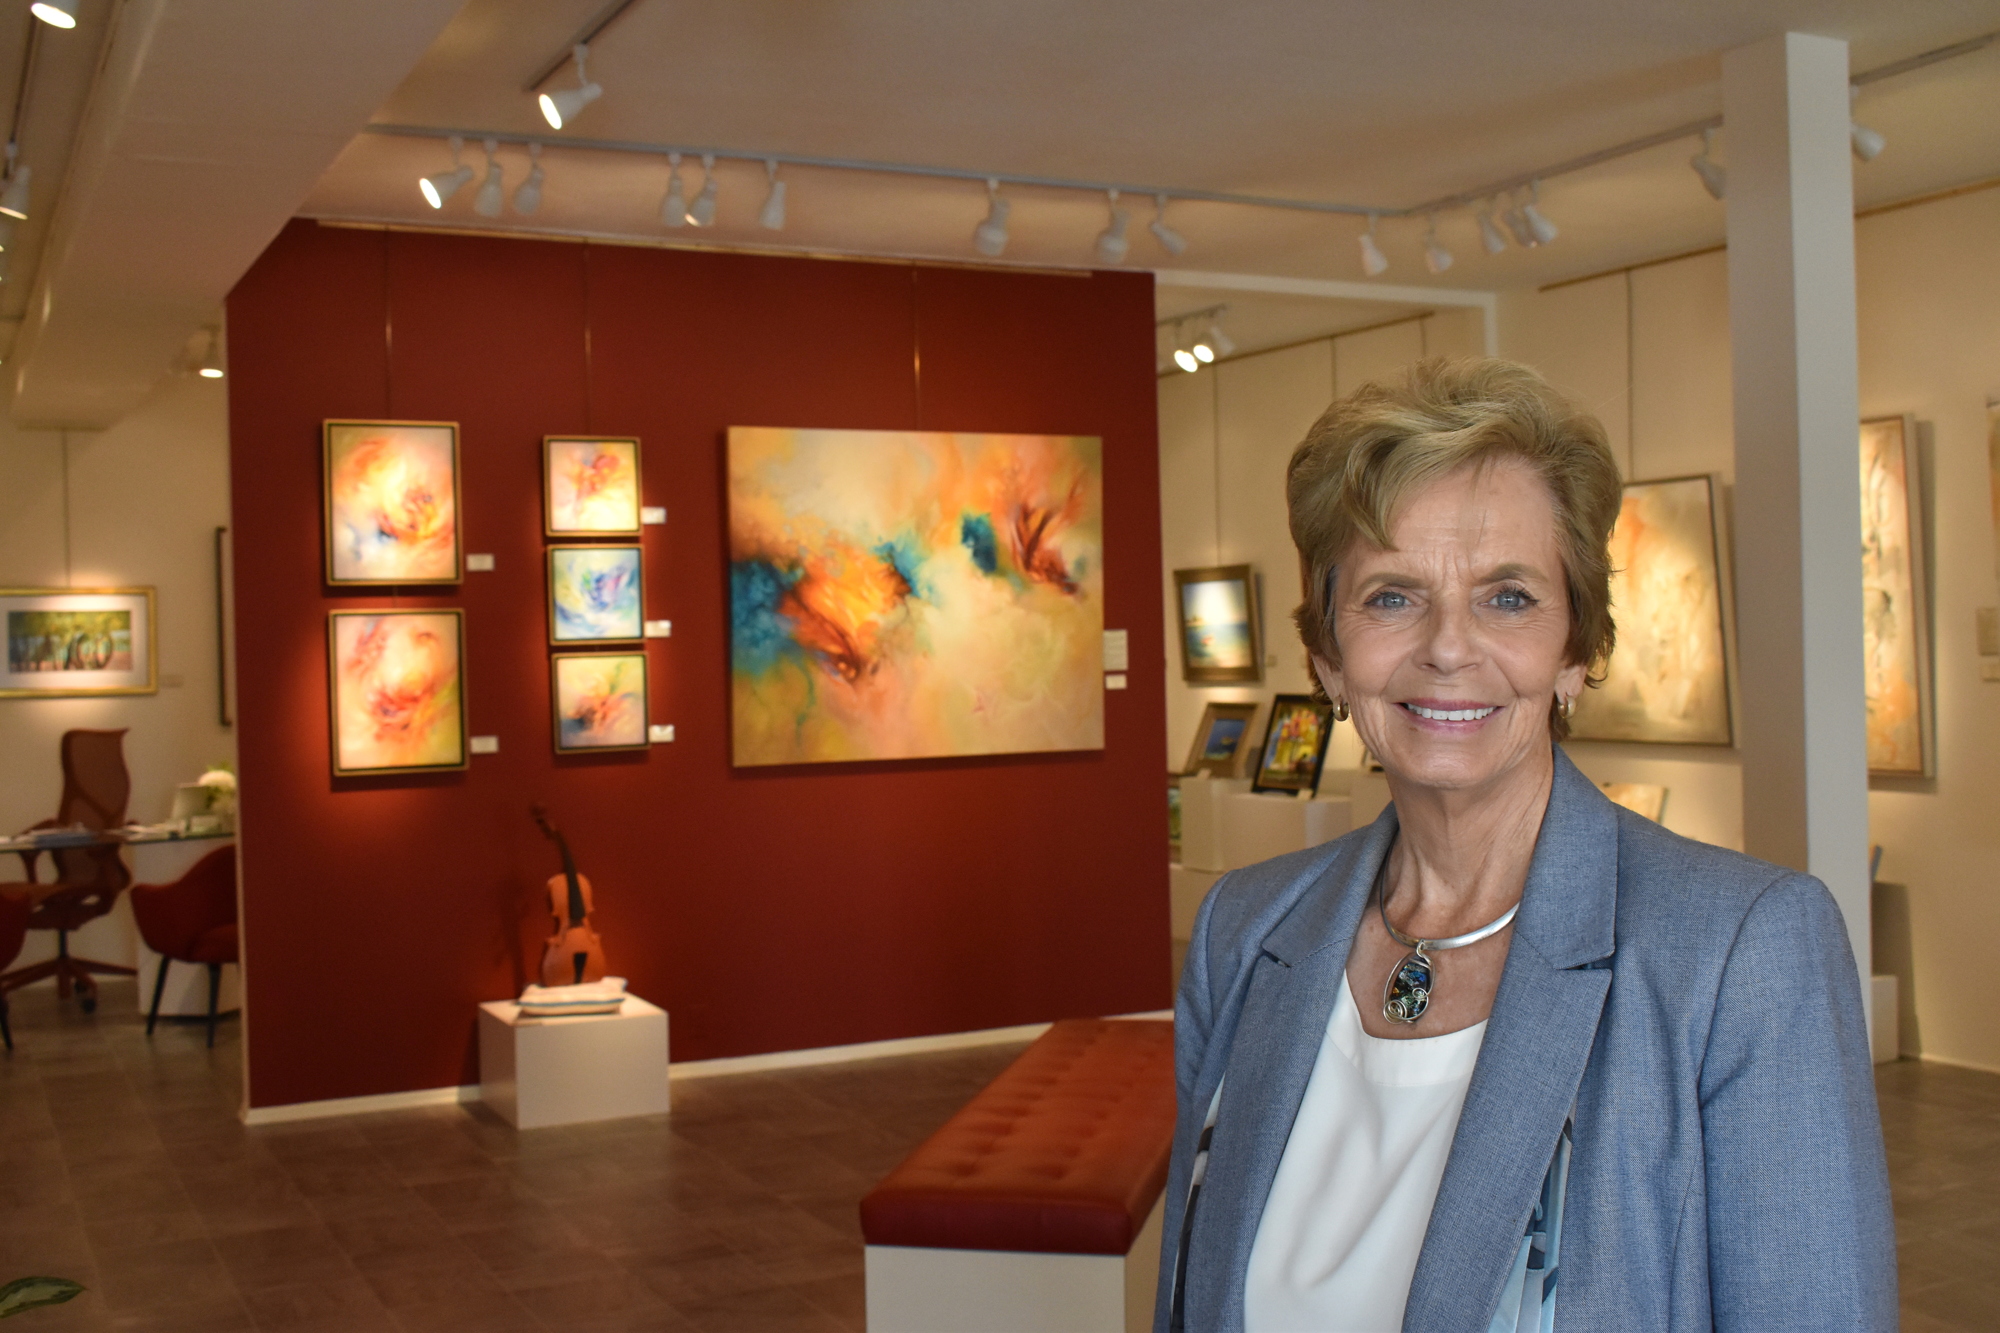 Pat Dabbert of Dabbert Gallery says as long as galleries aren't holding special events, they may be among the safest places to go among public places. (Photo by Klint Lowry)